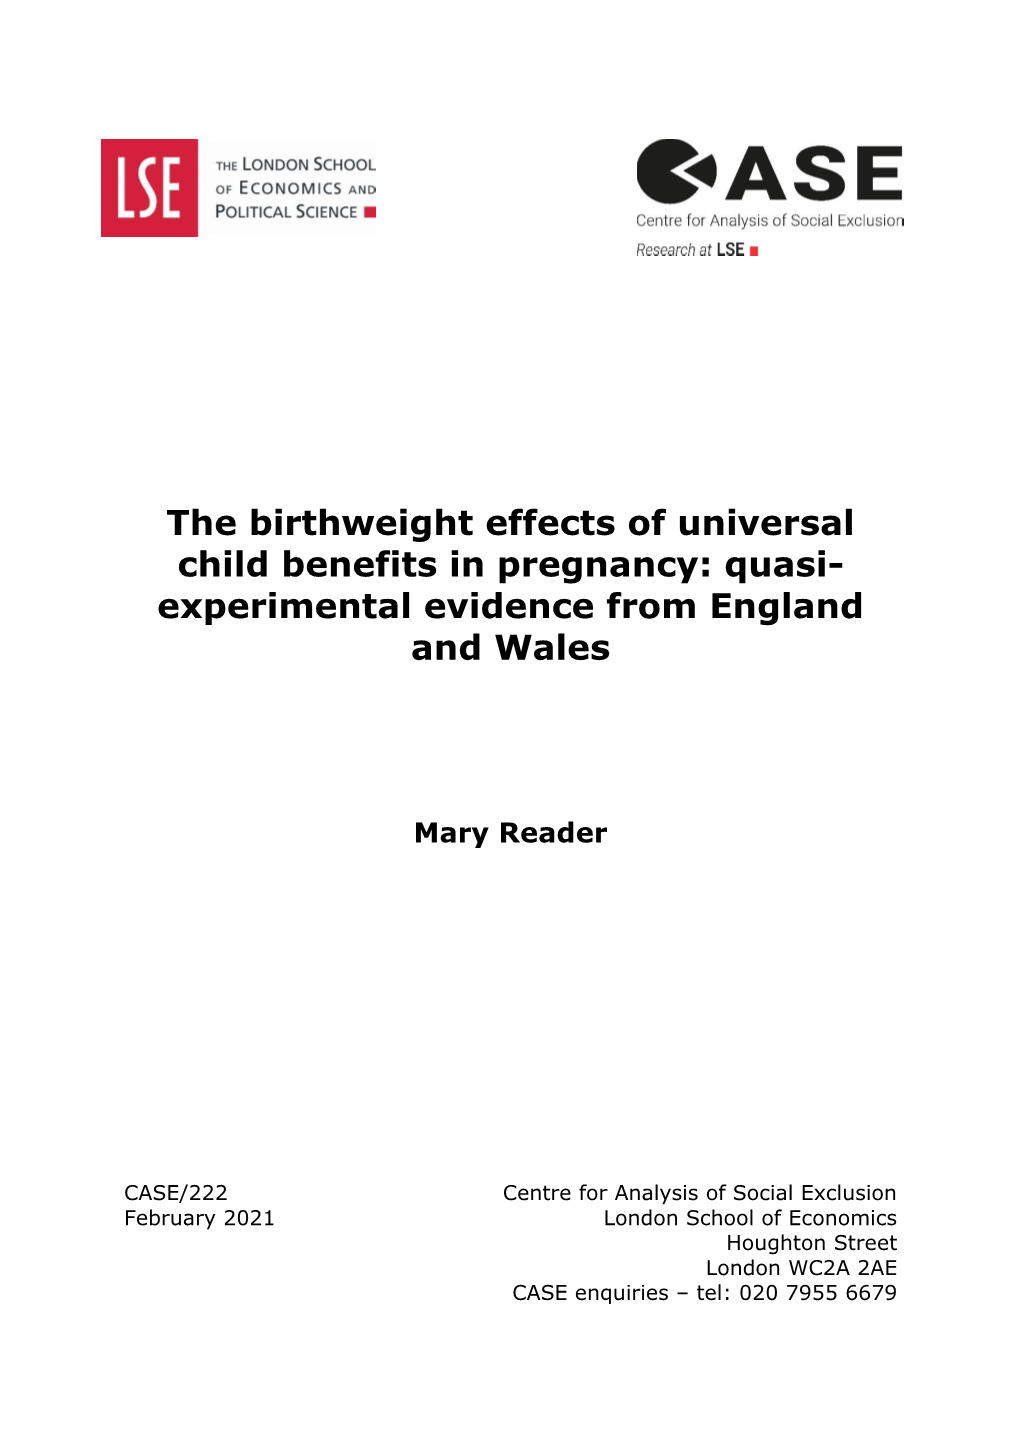 The Birthweight Effects of Universal Child Benefits in Pregnancy: Quasi- Experimental Evidence from England and Wales